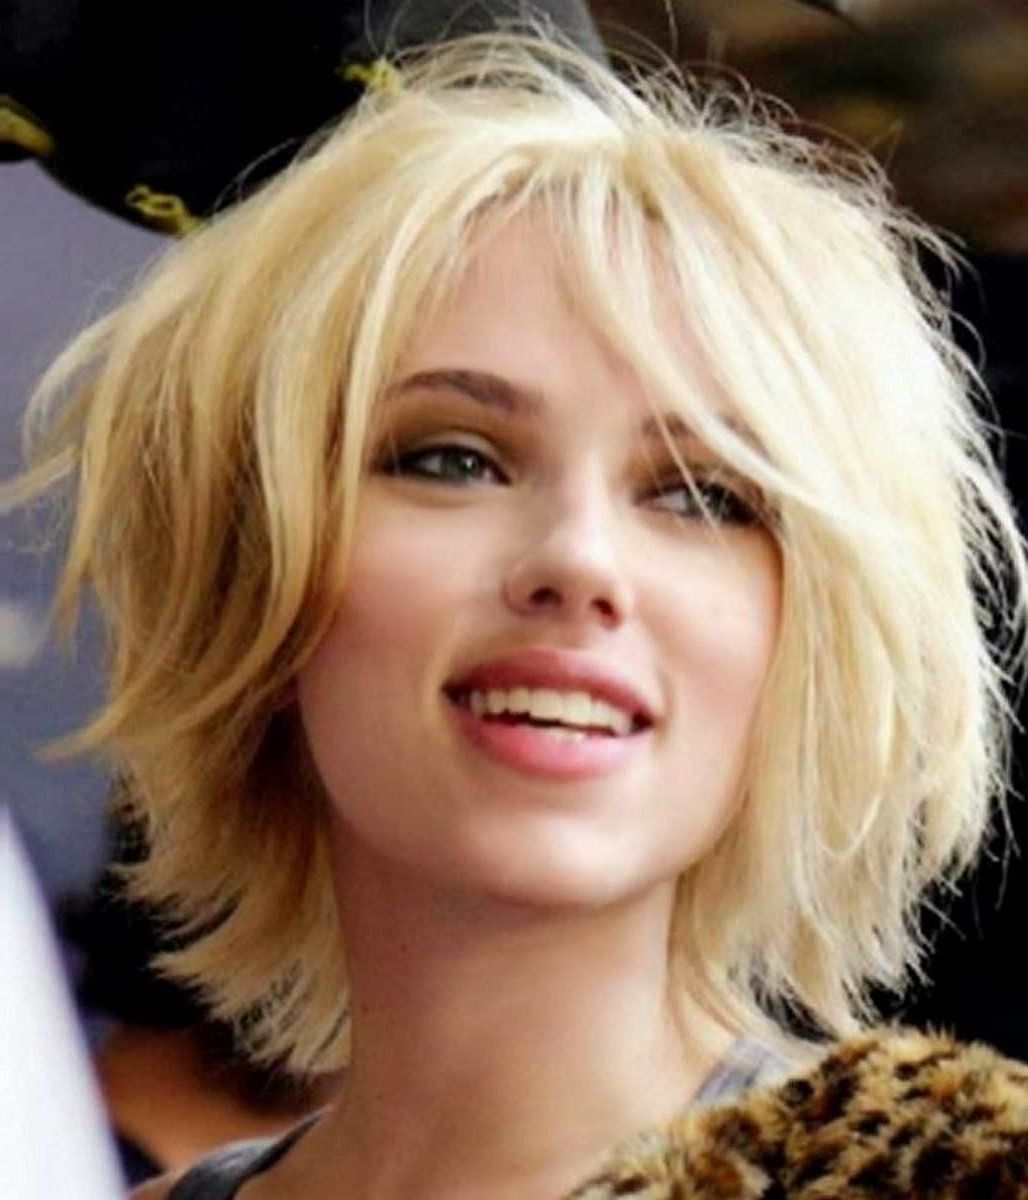 Short Shaggy Hairstyles For Thick Hair: Popular Short Shaggy Intended For Favorite Shaggy Hairstyles For Oval Faces (View 12 of 15)